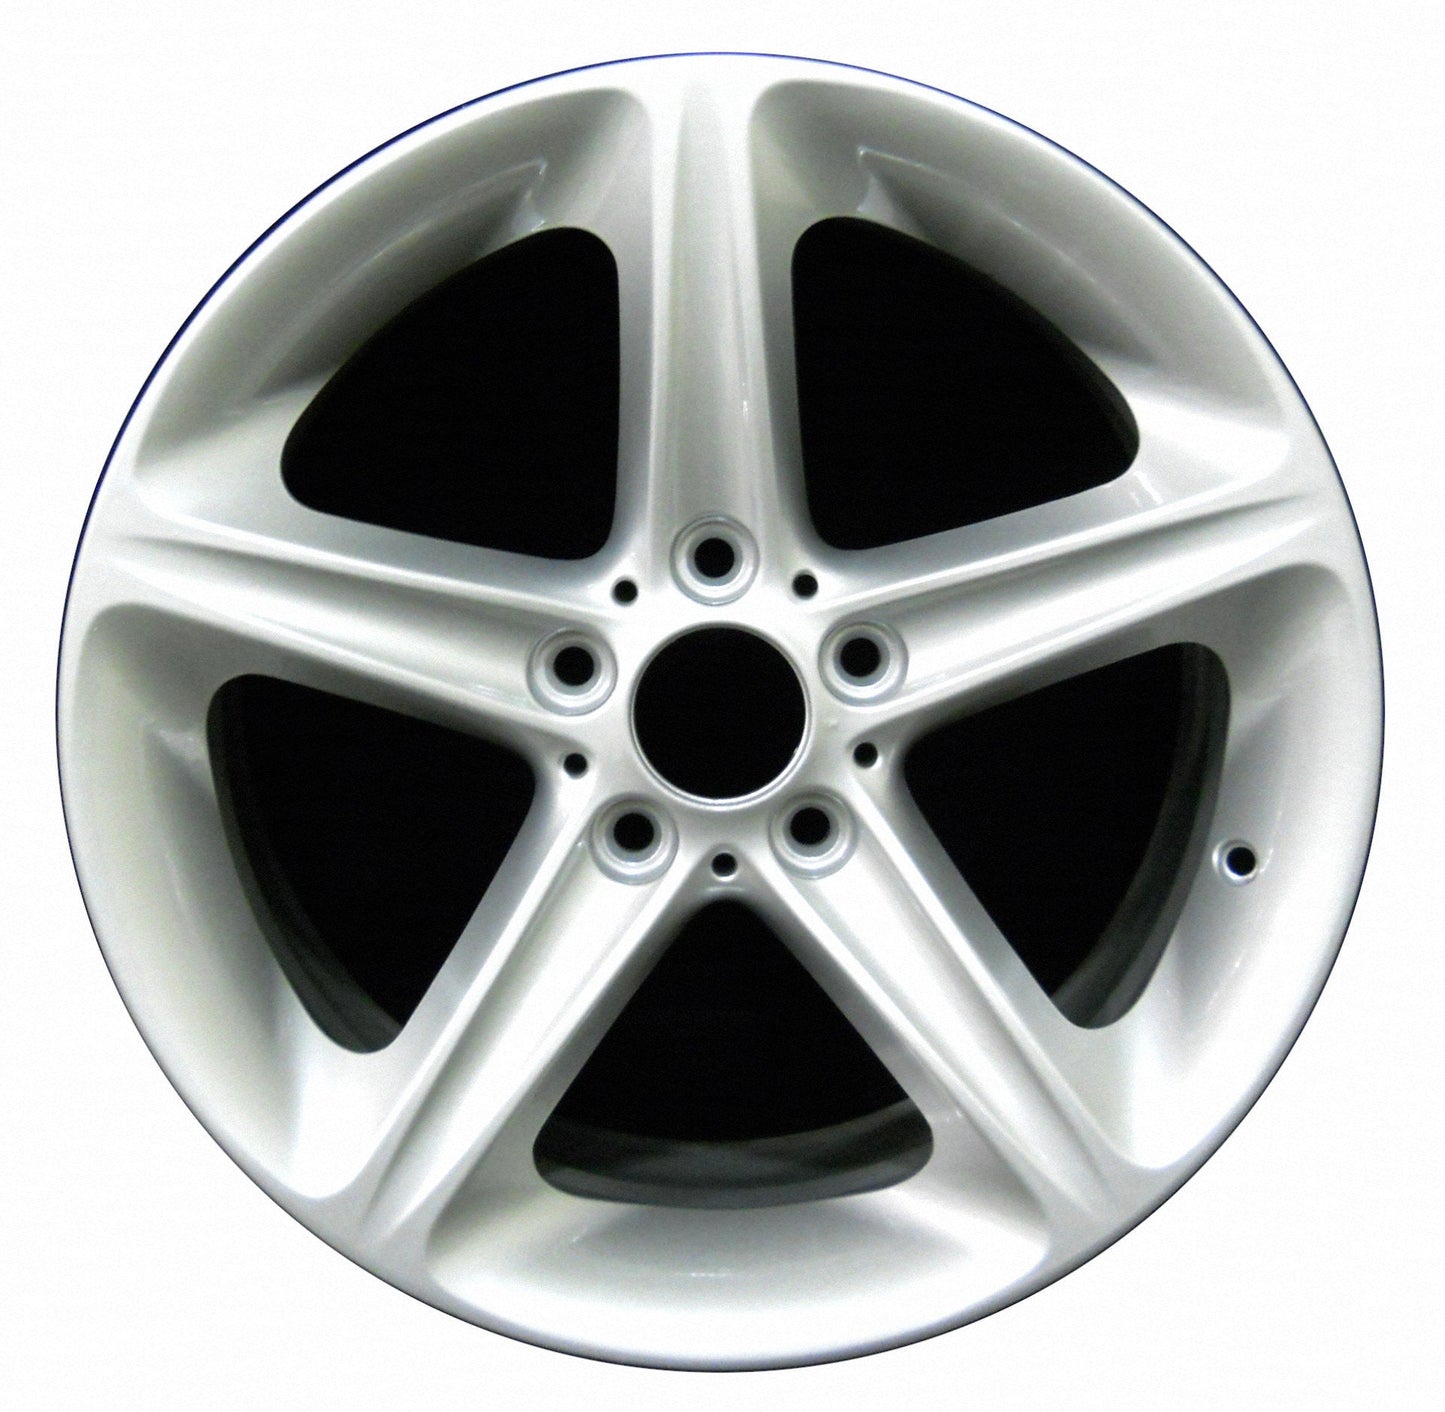 BMW 128i  2008, 2009, 2010, 2011, 2012, 2013 Factory OEM Car Wheel Size 18x8.5 Alloy WAO.71261RE.PS10.FF